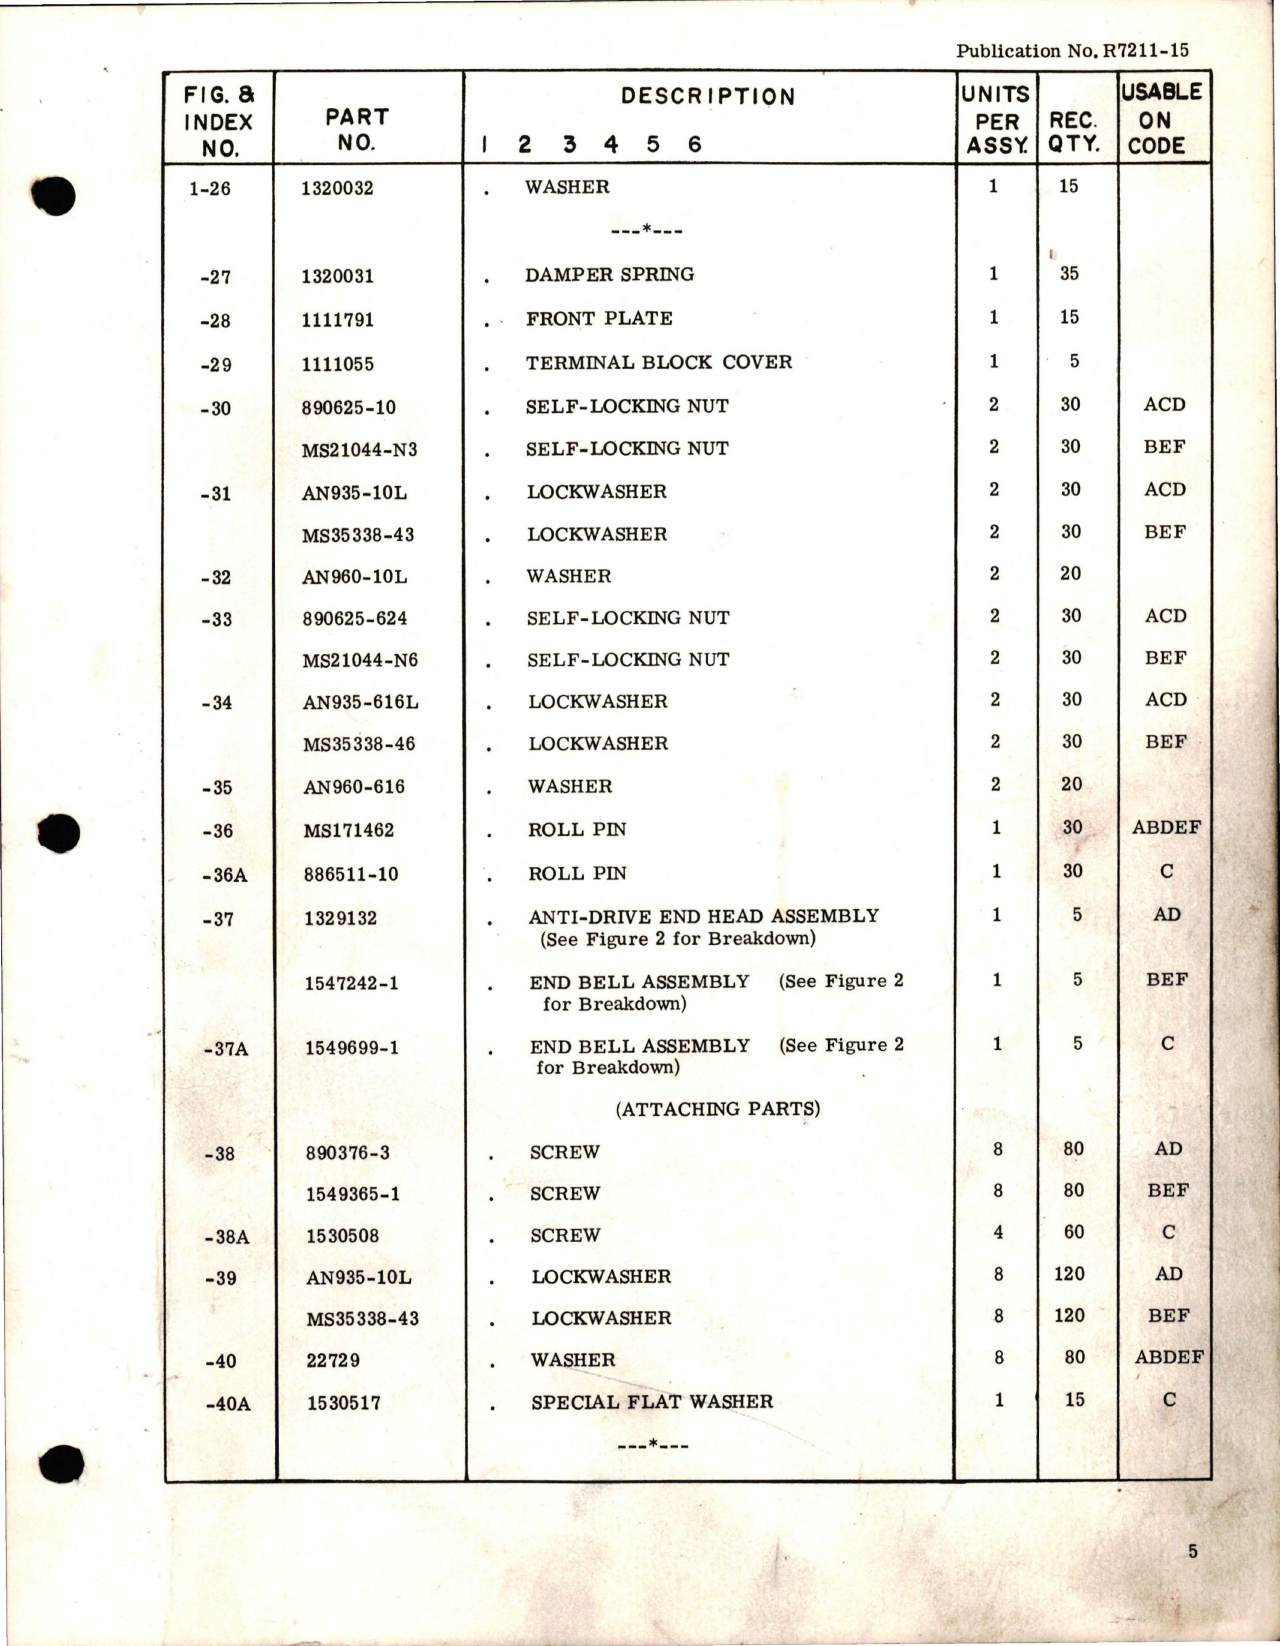 Sample page 7 from AirCorps Library document: Illustrated Parts List for Starter Generator